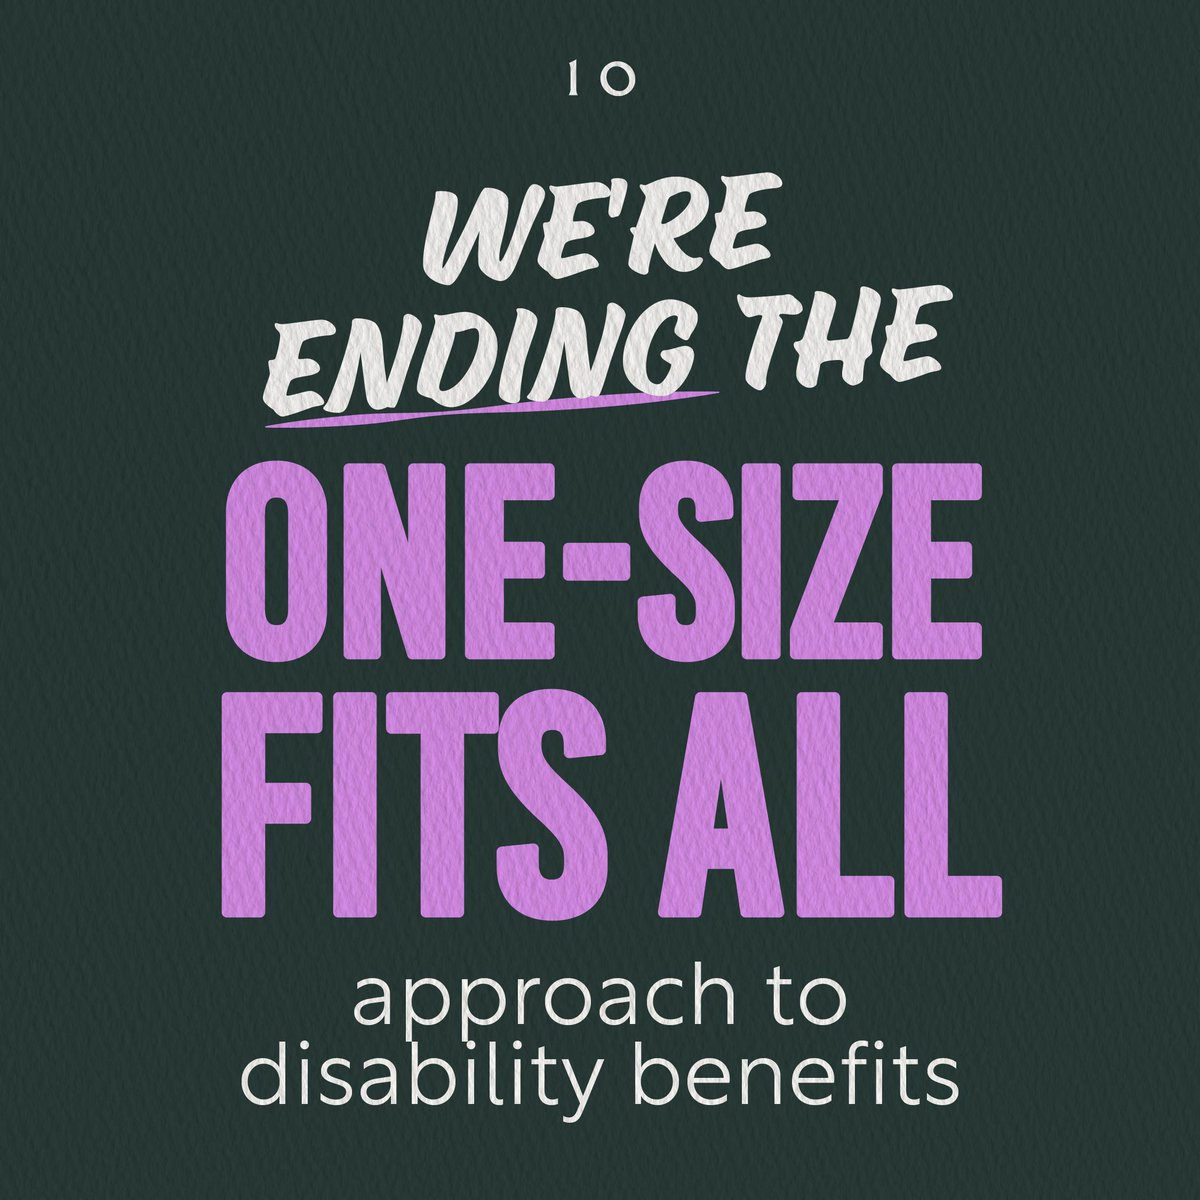 Our disability benefit system isn’t working how it should be. That's why we're reforming it, targeting support to those who need it most and ending the one-size fits all approach. We'll always protect the vulnerable, but must make sure the system is sustainable for the future.